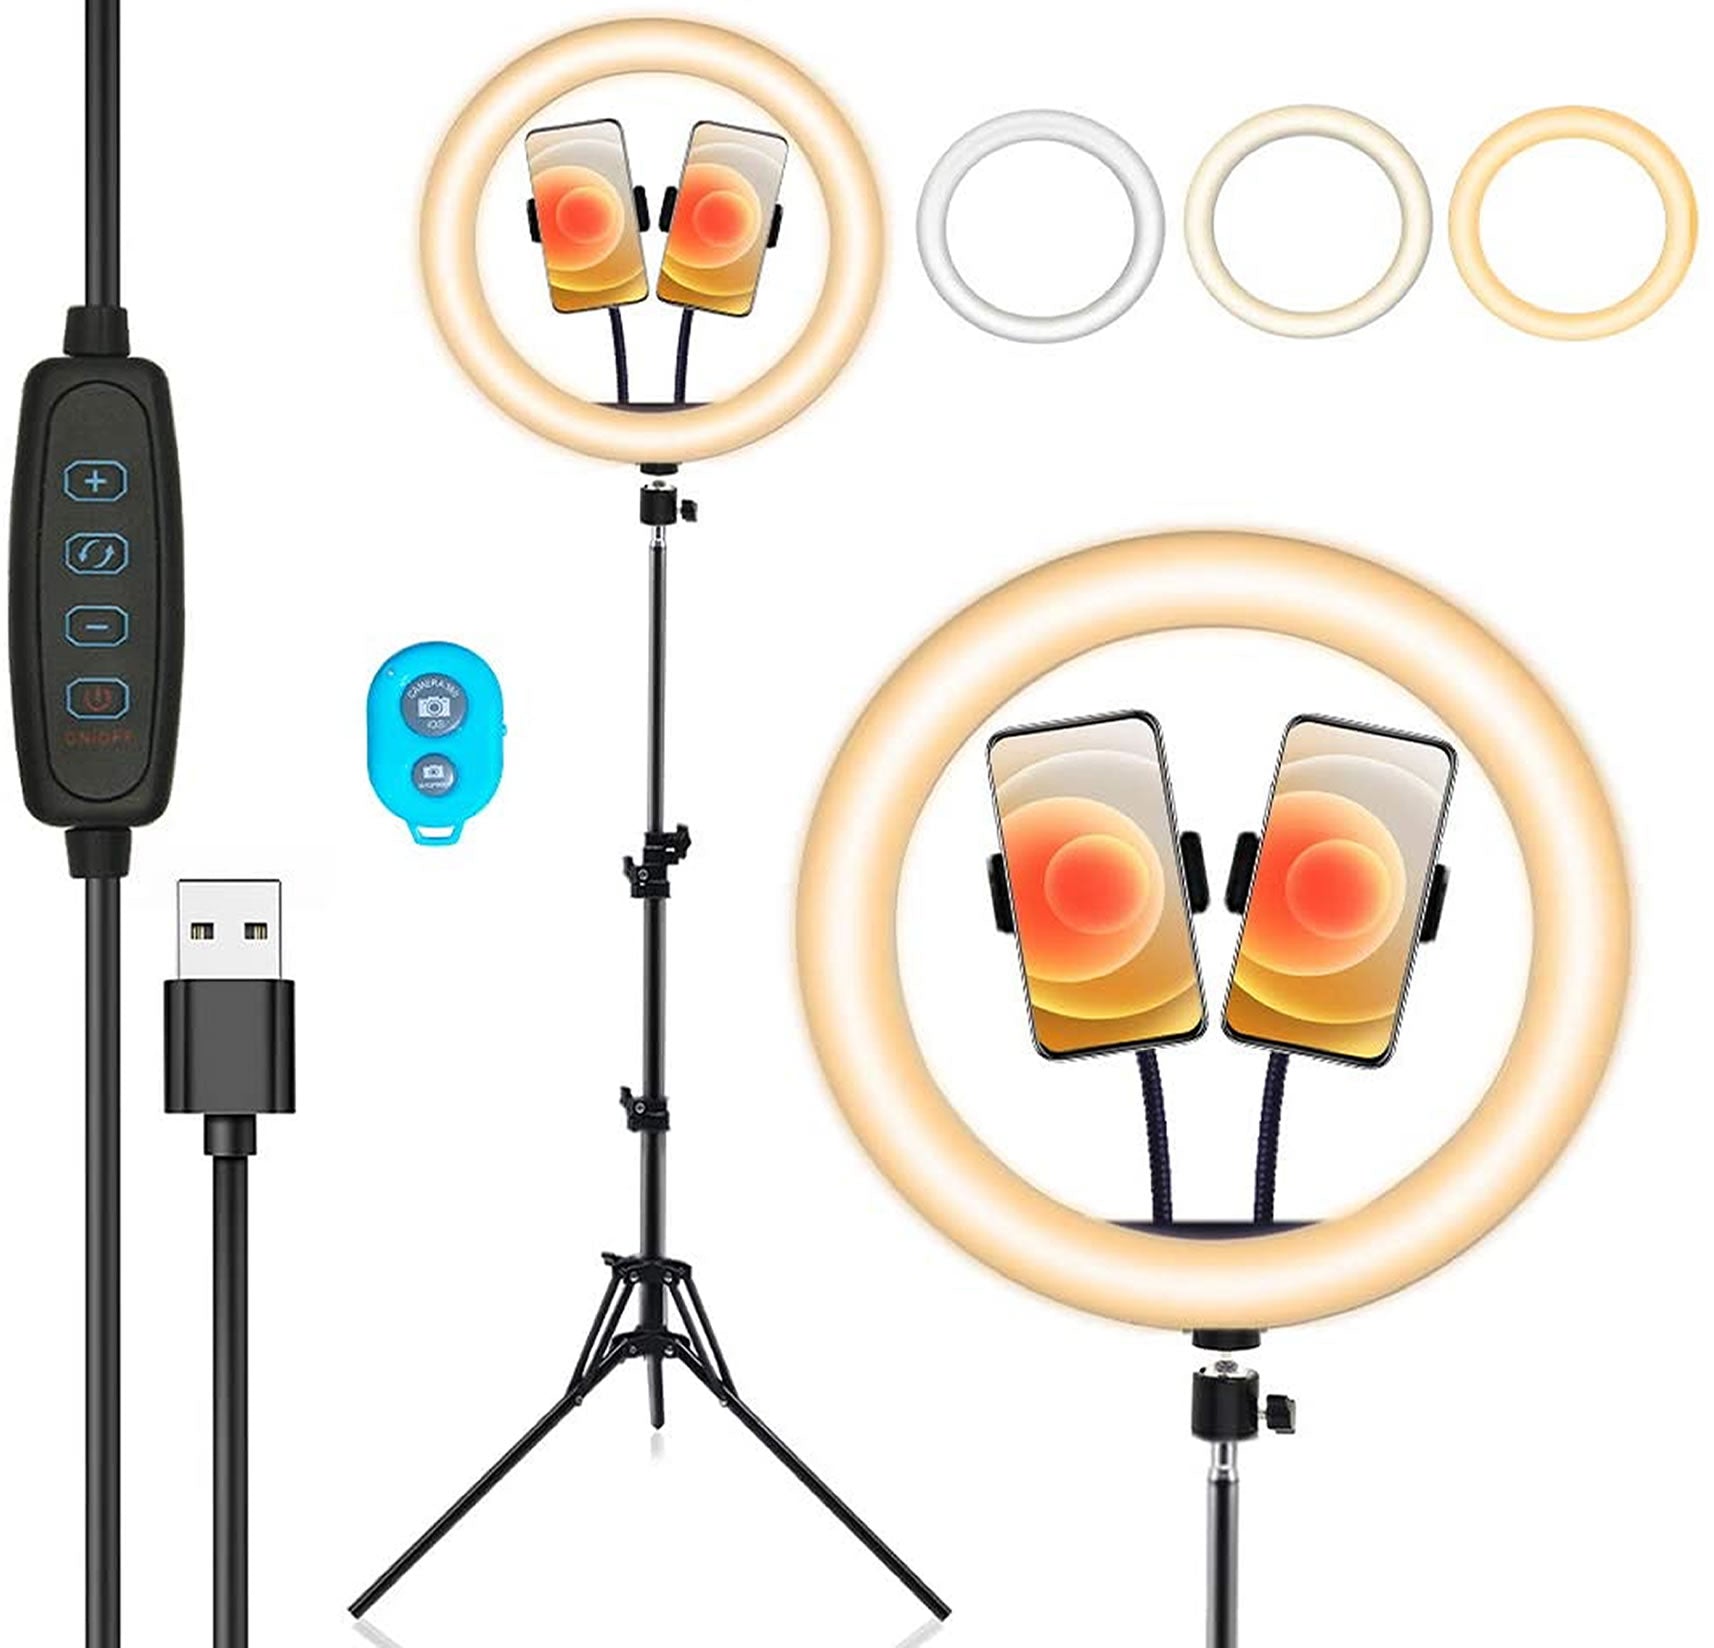 97-7212 12" LED Ring Light with Tripod and Dual Phone Holders